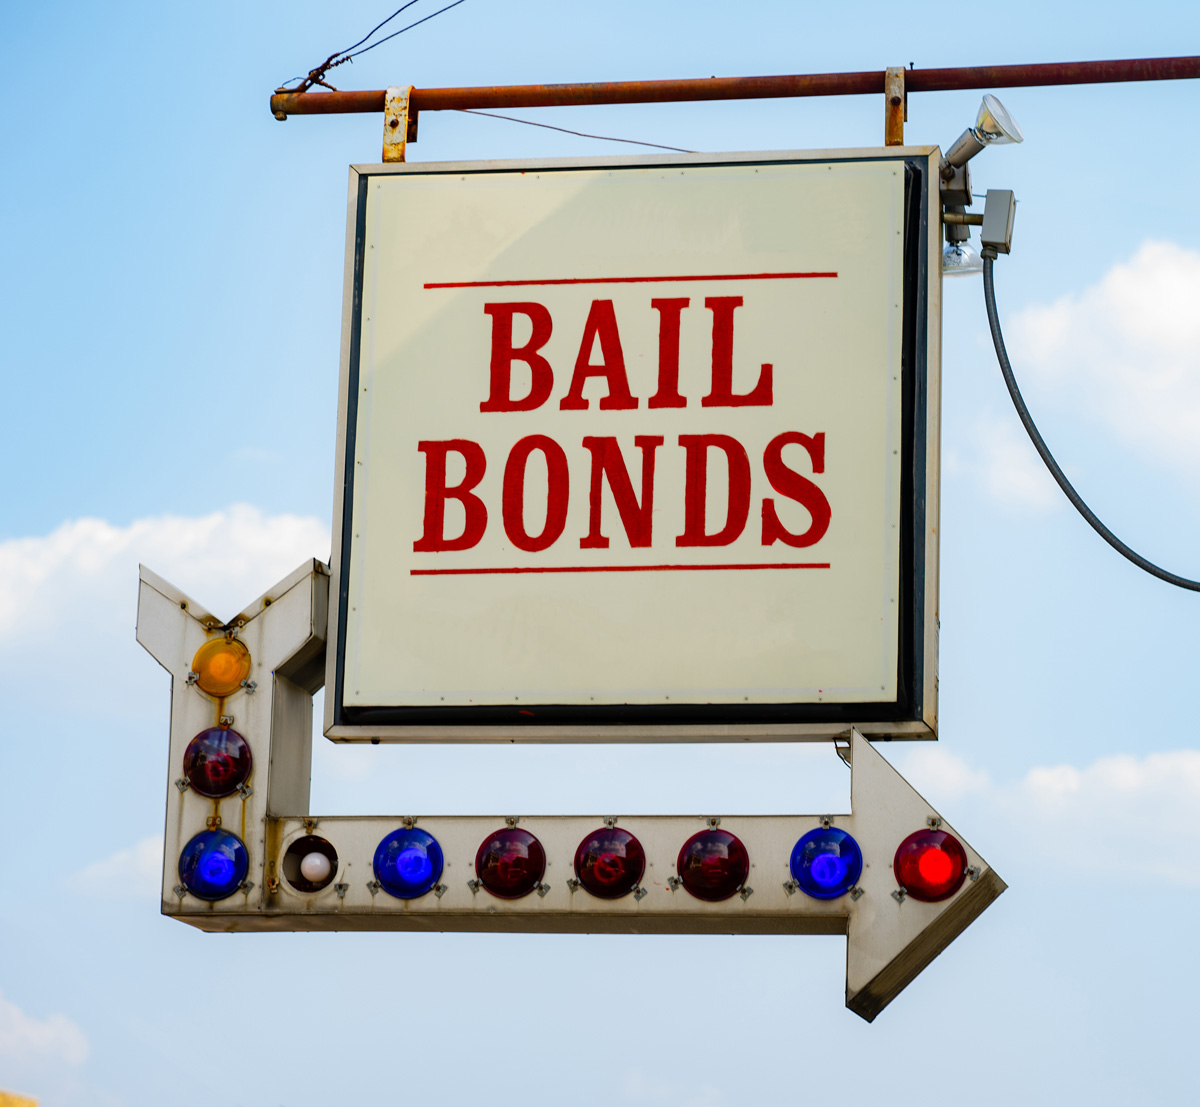 A bail bond sign with an arrow in El Paso.